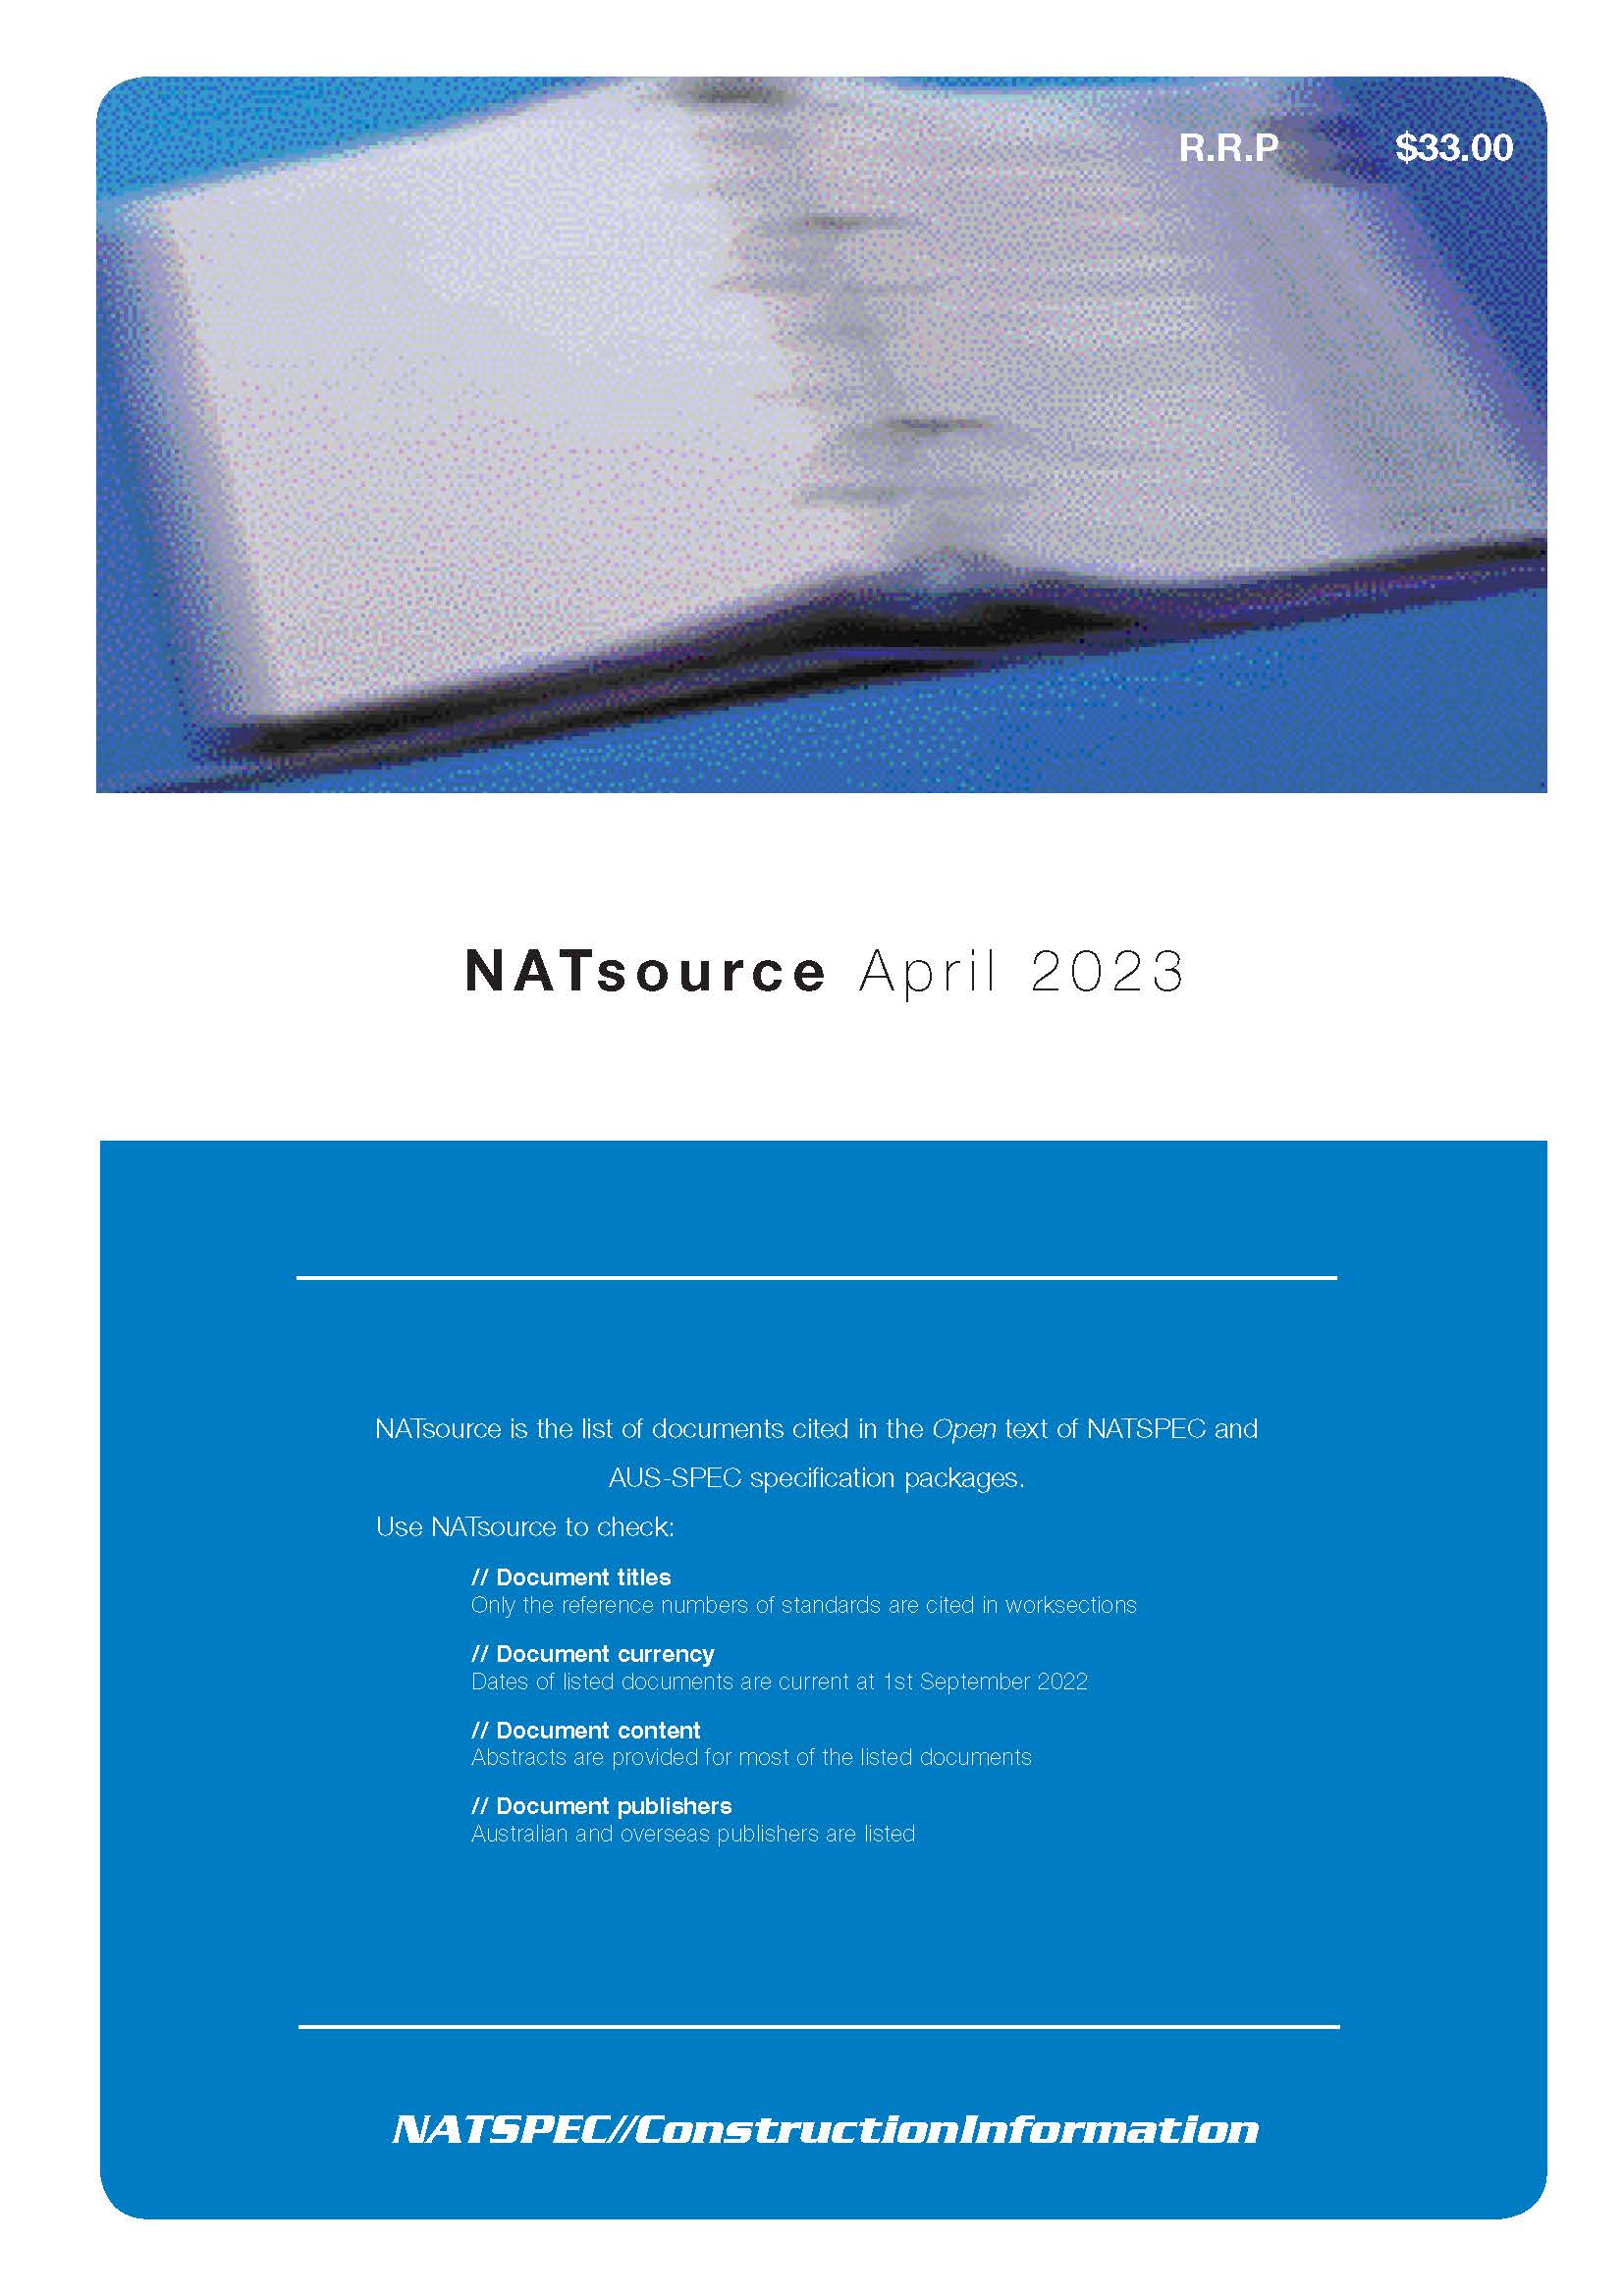 NATsource cover